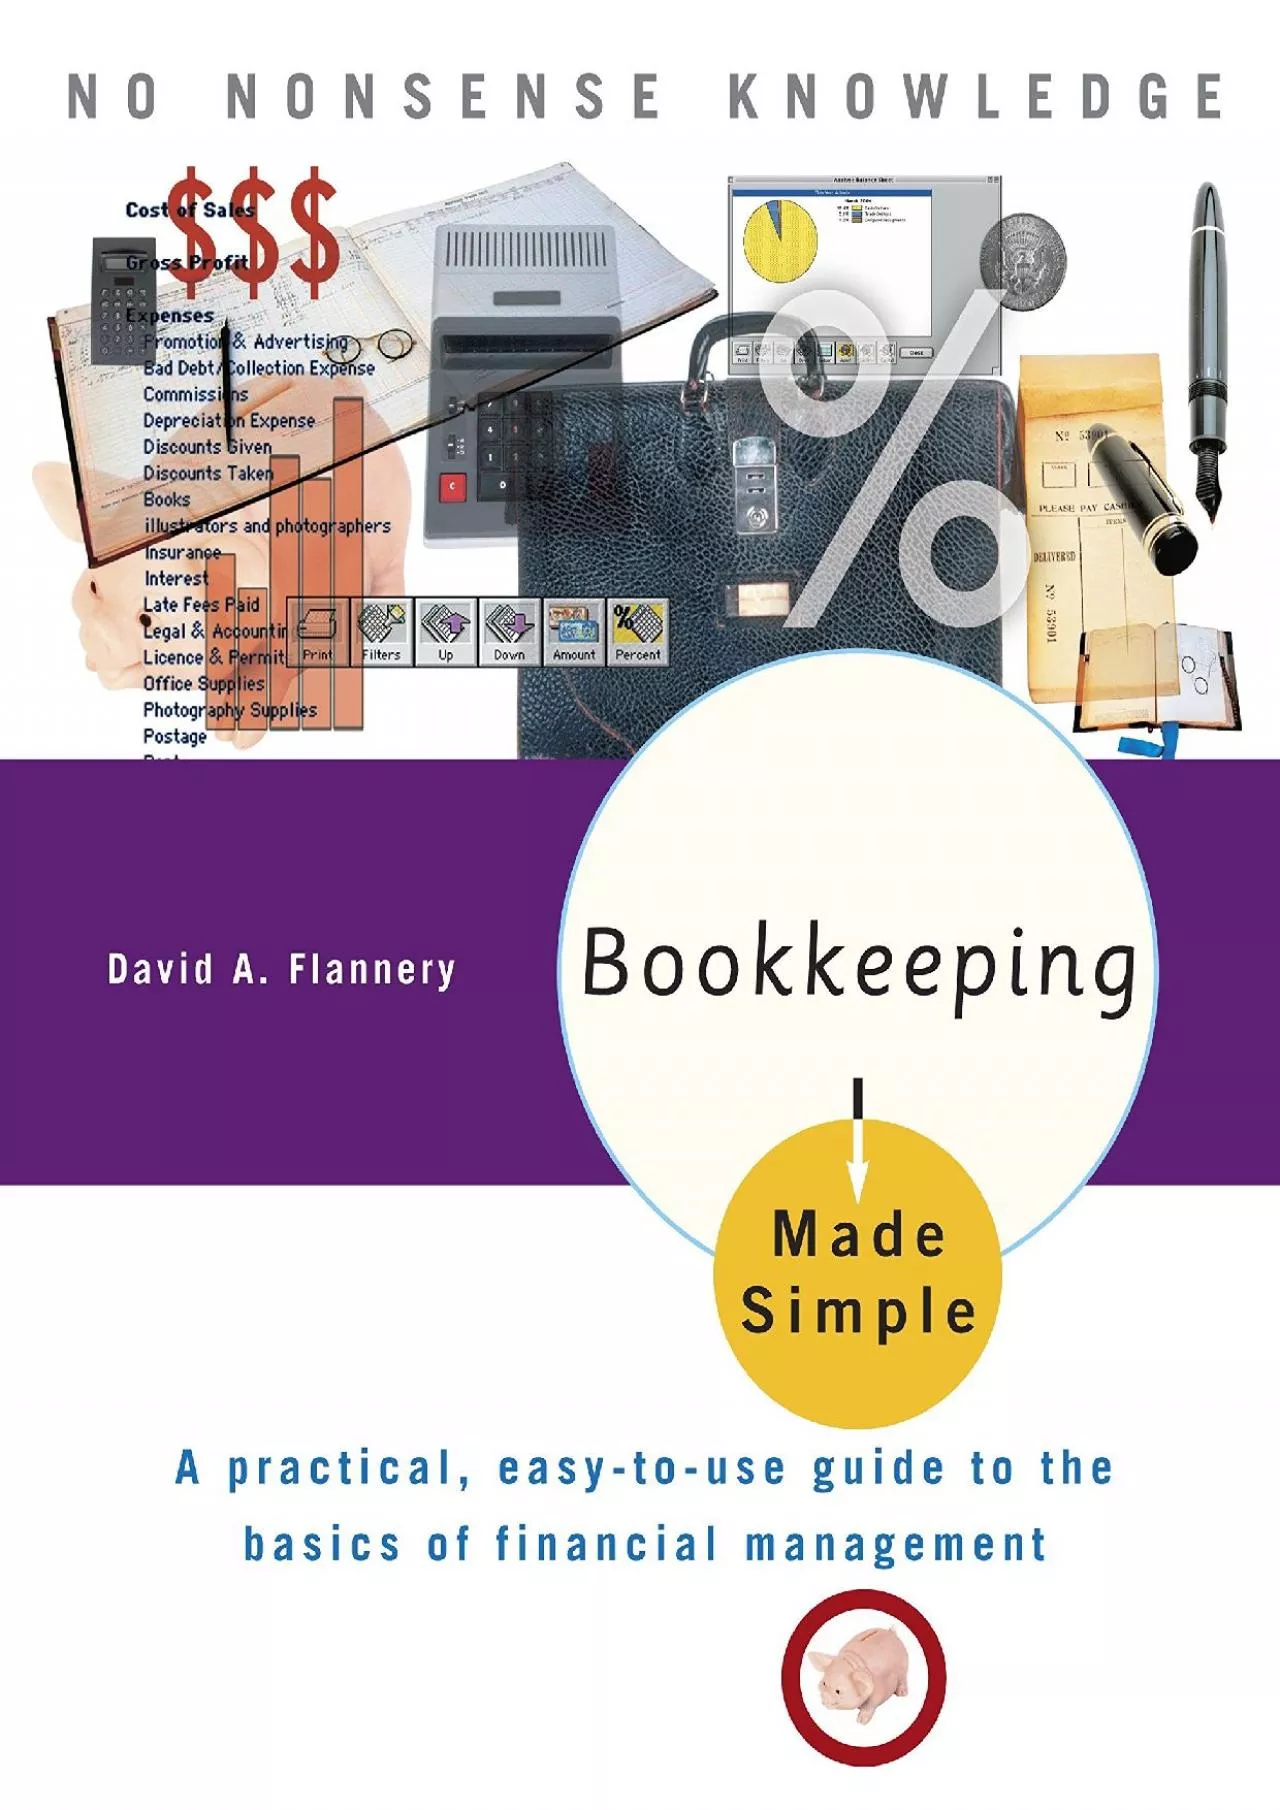 (BOOK)-Bookkeeping Made Simple: A Practical, Easy-to-Use Guide to the Basics of Financial